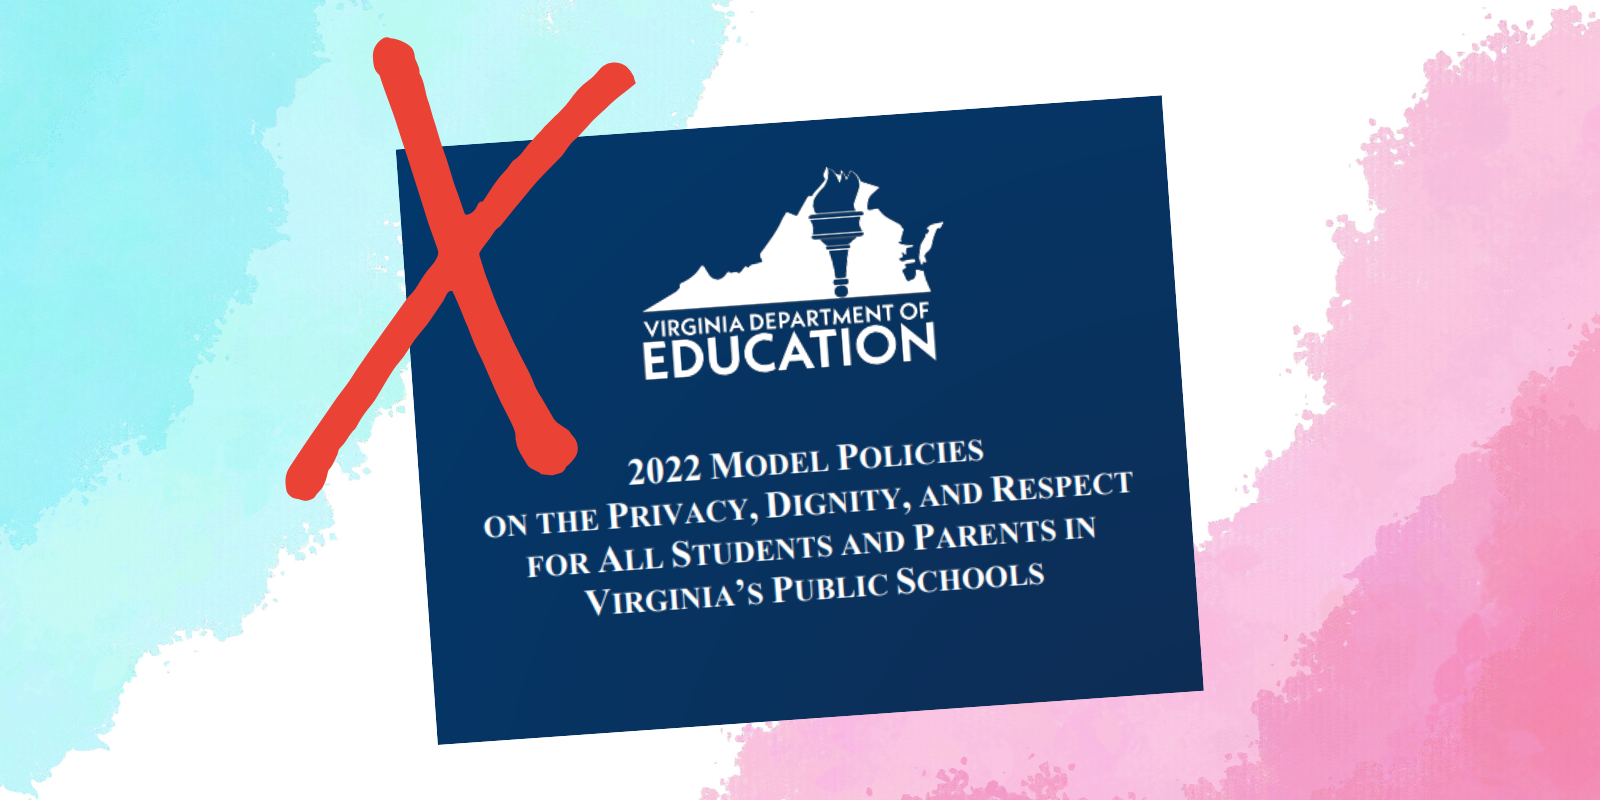 trans rights colored background of azure blue, white, and pink, with a screenshot of Youngkin admin's anti-trans model policies that read: "Virginia Department of Education. 2022 Model Policies on the privacy, dignity, and respect for all students."